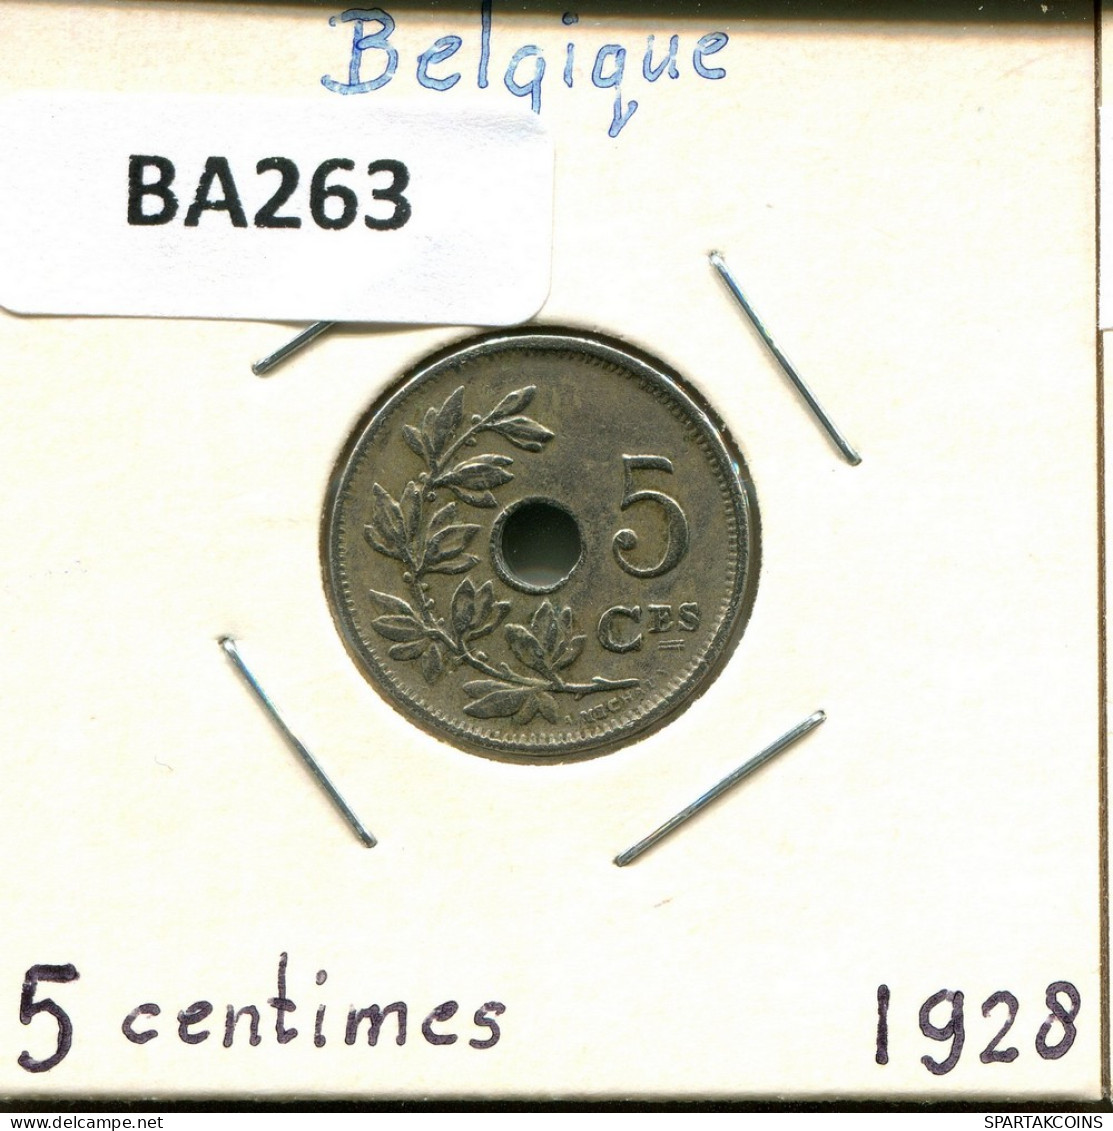 5 CENTIMES 1928 FRENCH Text BELGIUM Coin #BA263.U - 5 Cents